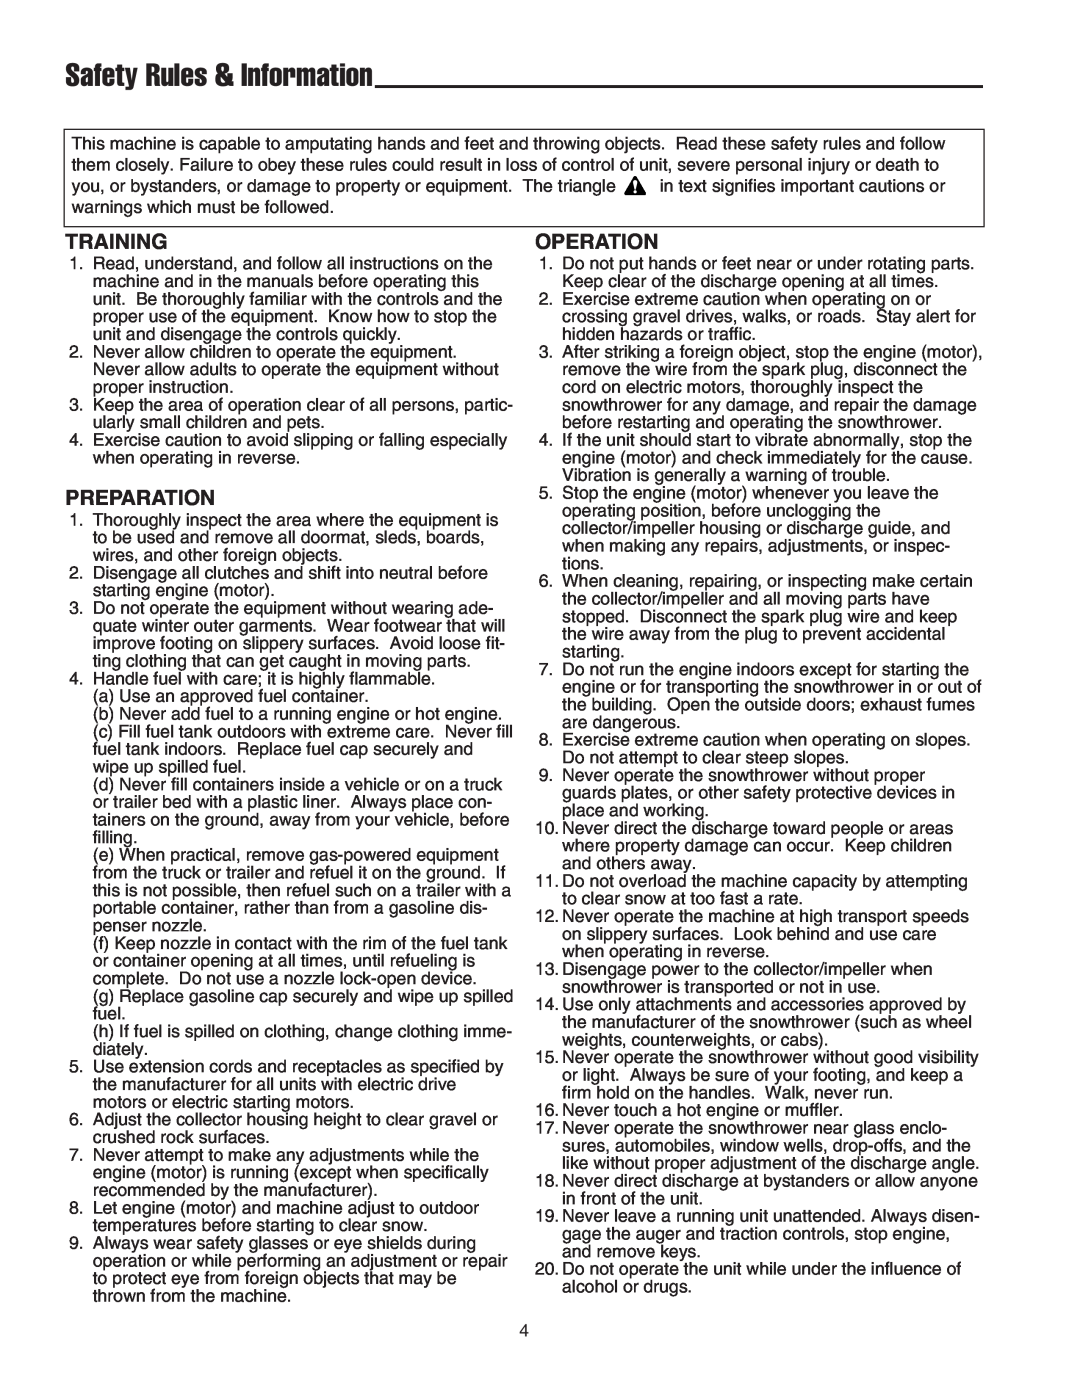 Snapper 522E manual Safety Rules & Information, Training, Preparation, Operation 